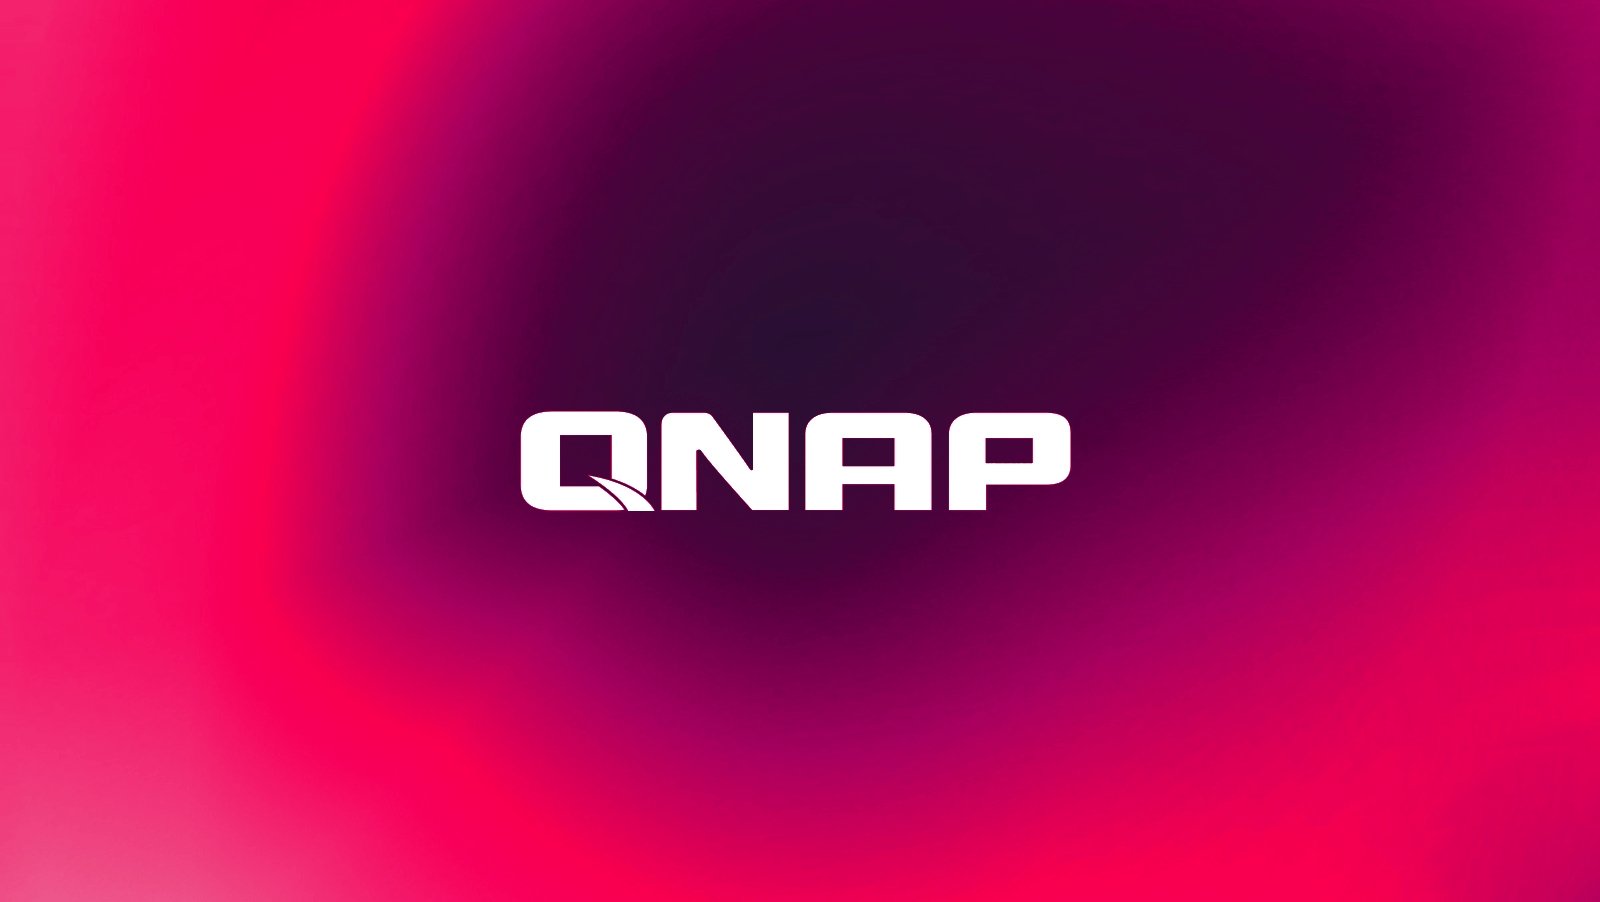 QNAP warns users to disable AFP until it fixes critical bugs